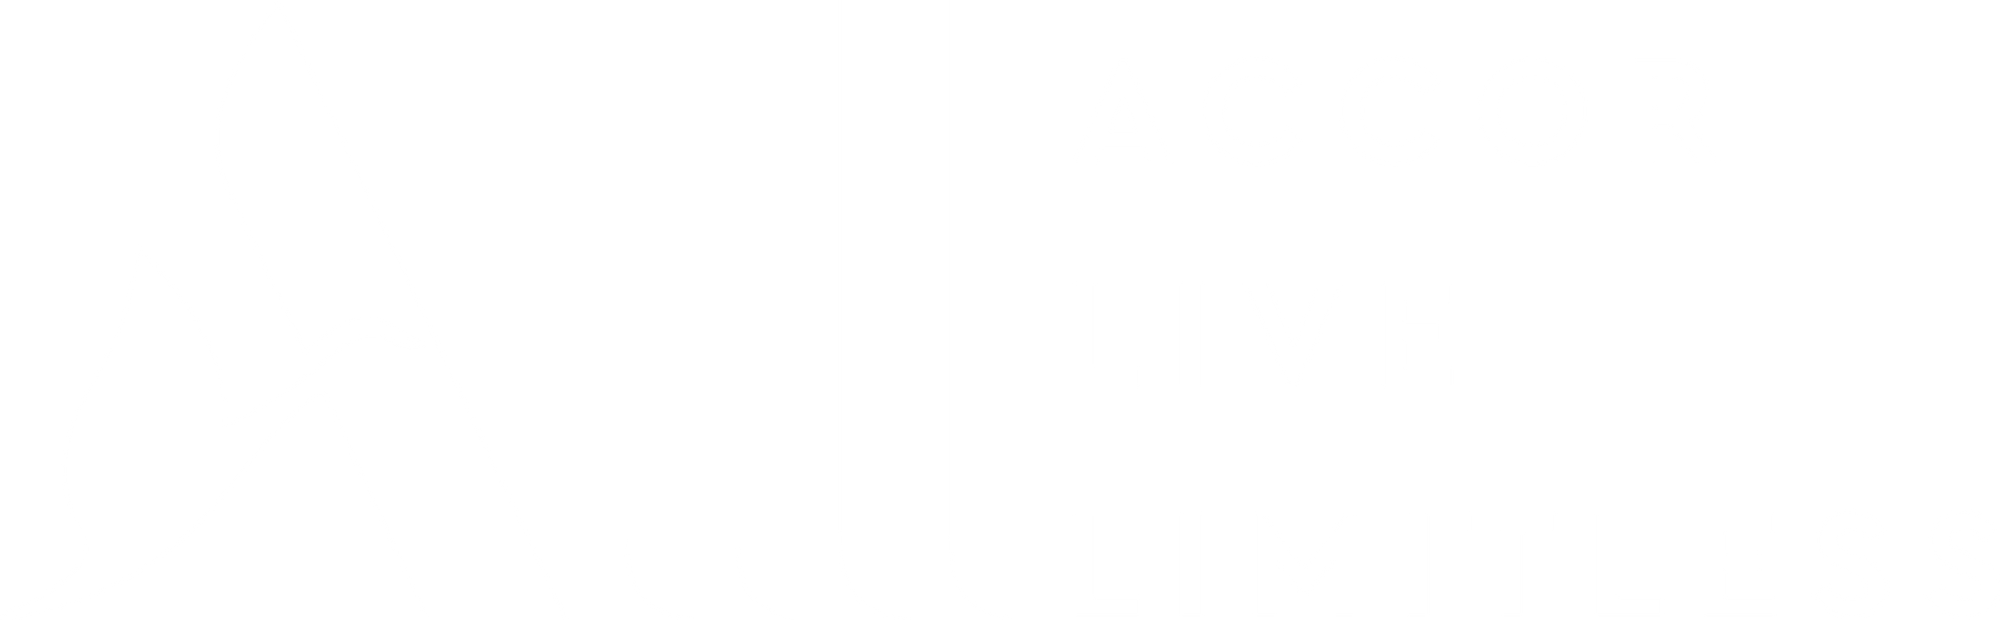 Accor Live Limitless Logo at Ibis Sydney Darling Harbour